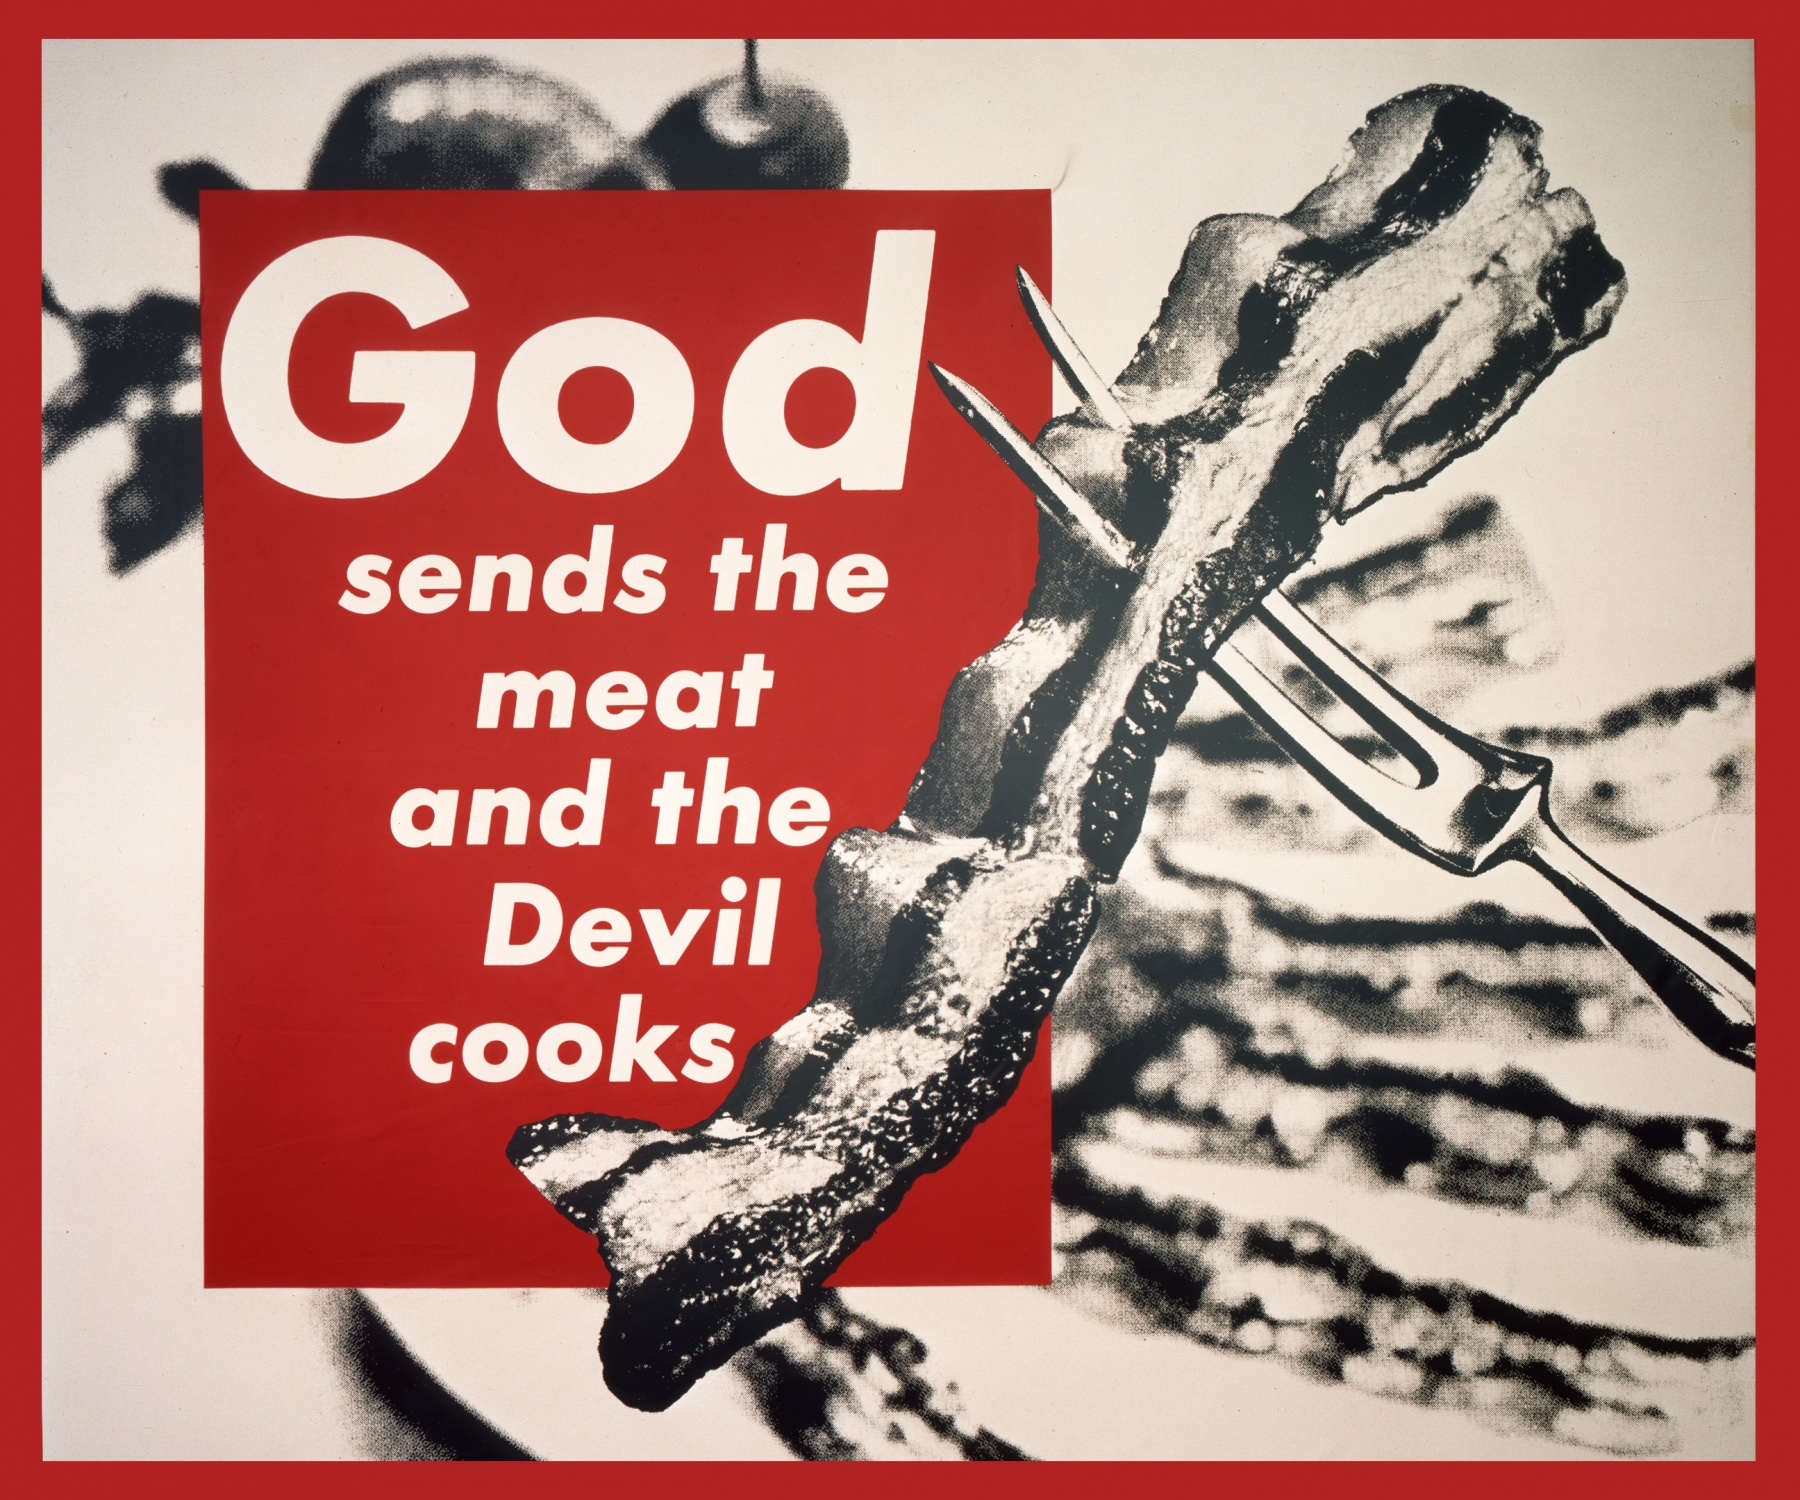 Barbara Kruger

Untitled (God Sends the Meat and the Devil Cooks), 1988

photographic silkscreen on vinyl

111 x 131 1/2 in.

The collection of Alain Servais

Courtesy: the artist

&amp;nbsp;